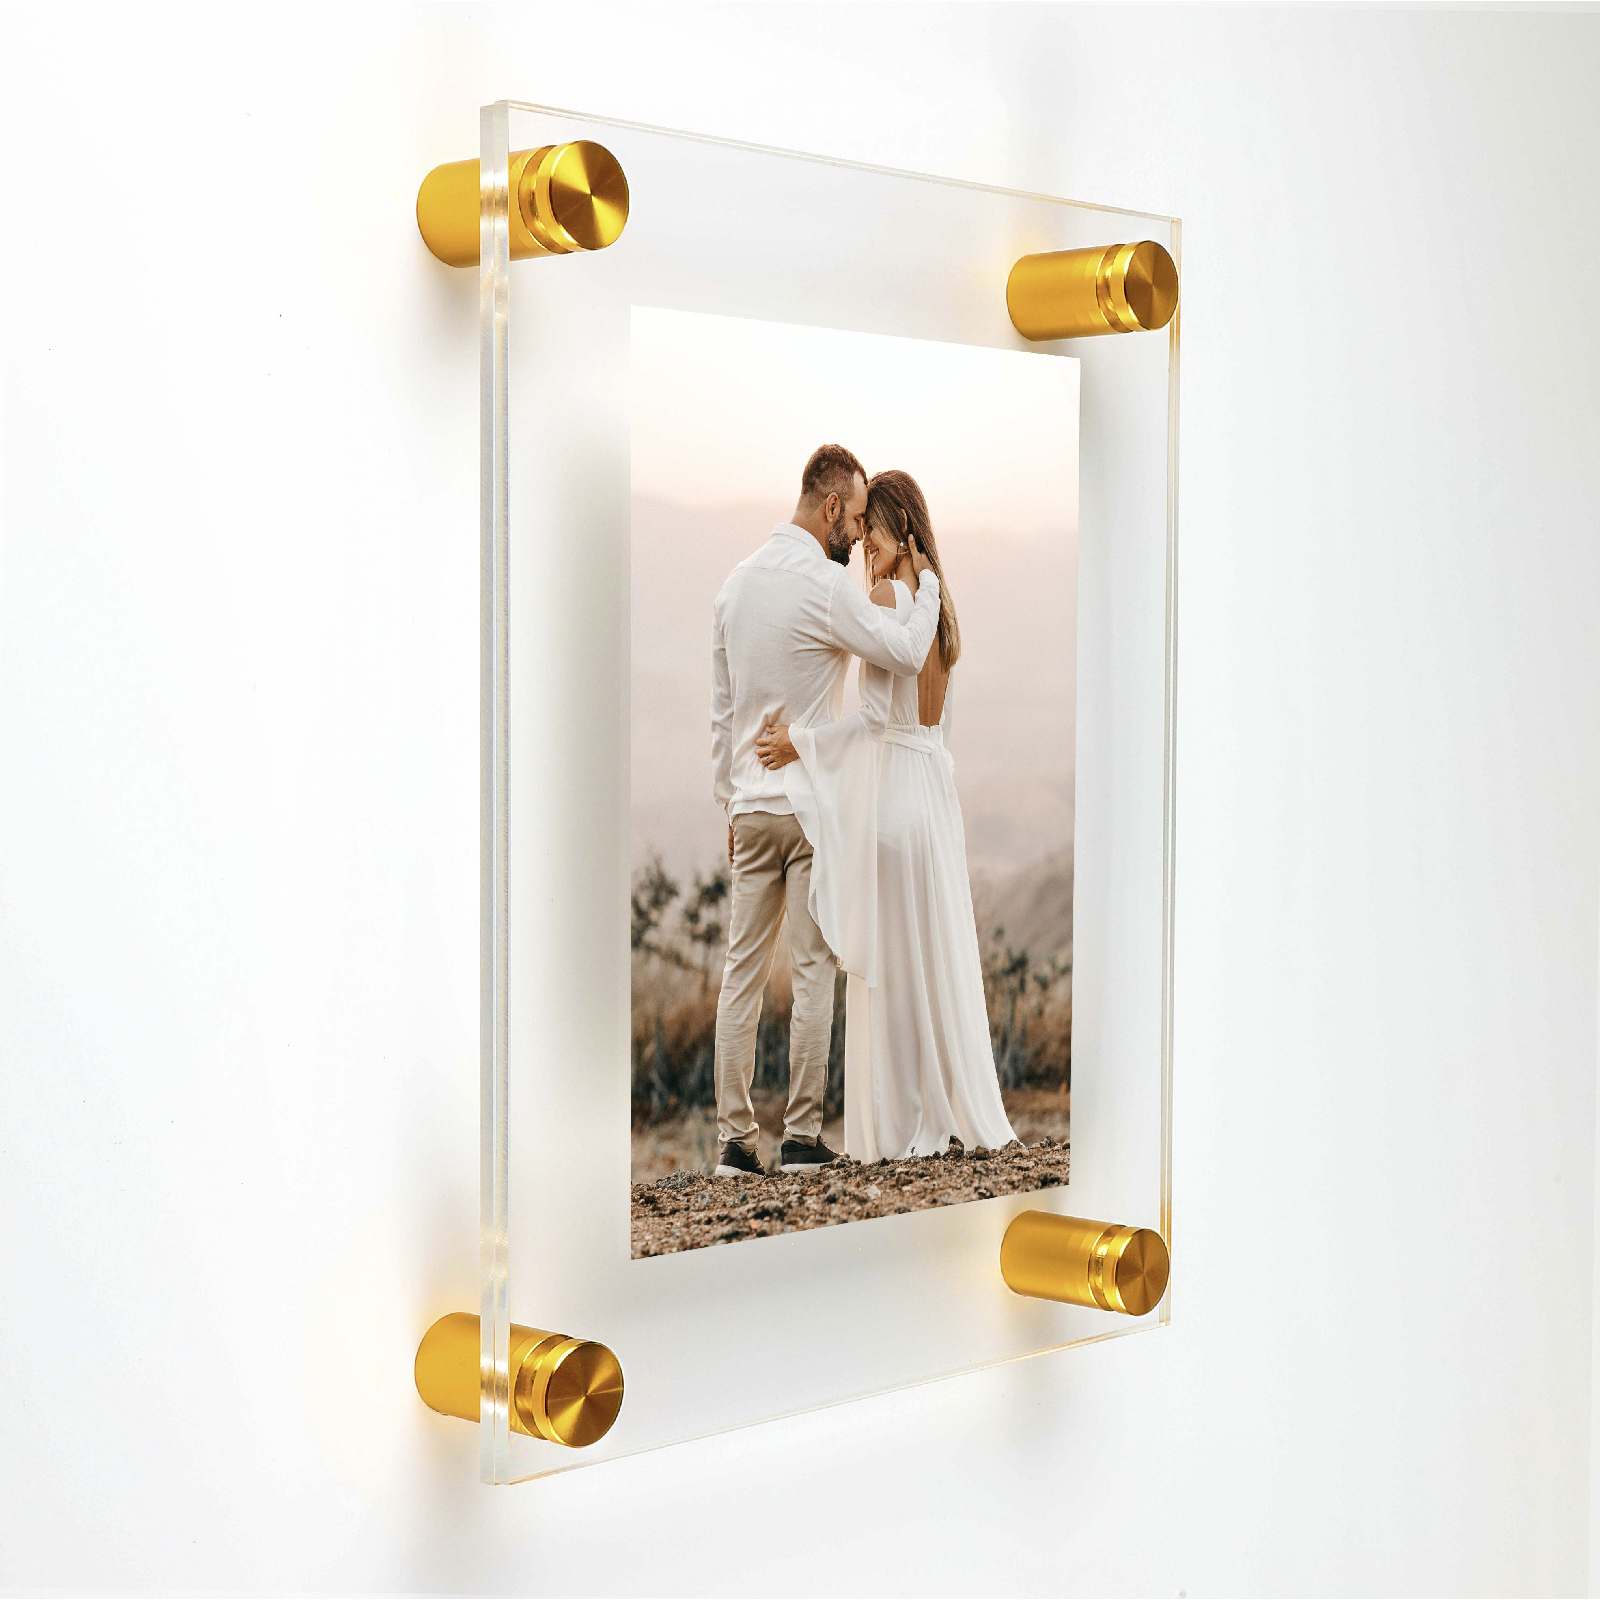 (2) 7-1/2'' x 9-1/2'' Clear Acrylics , Pre-Drilled With Polished Edges (Thick 1/8'' each), Wall Frame with (4) 5/8'' x 1'' Gold Anodized Aluminum Standoffs includes Screws and Anchors